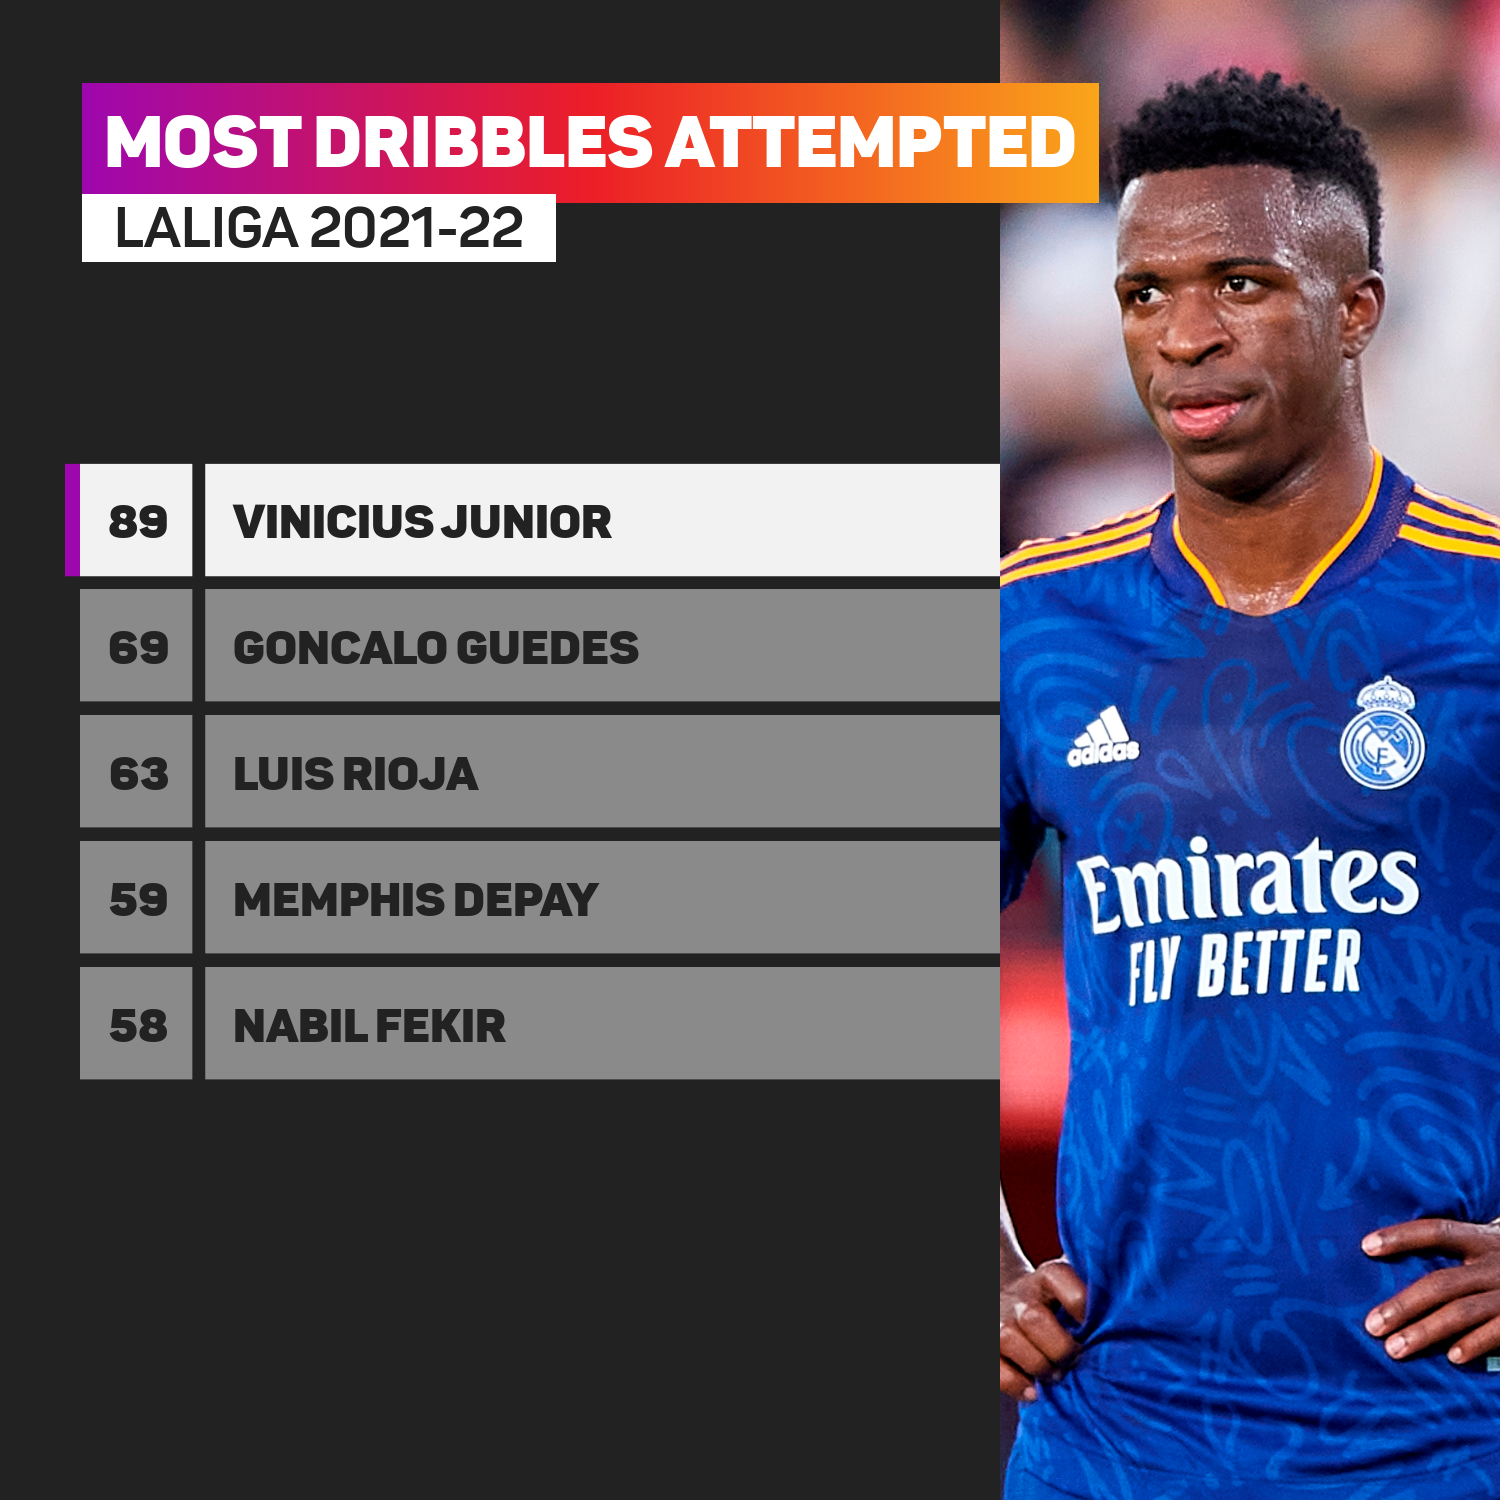 LaLiga most dribbles attempted